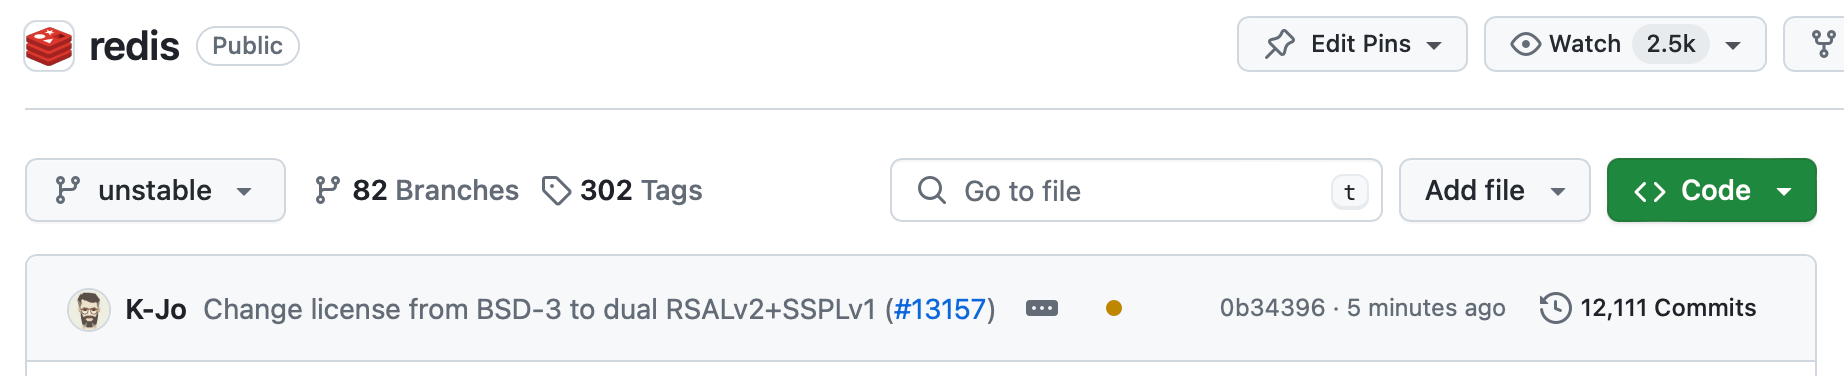 Screenshot from the Redis GitHub repo. The latest commit message says "Change license from BSD-3 to dual RSALv2+SSPLv1 (#13157)" 